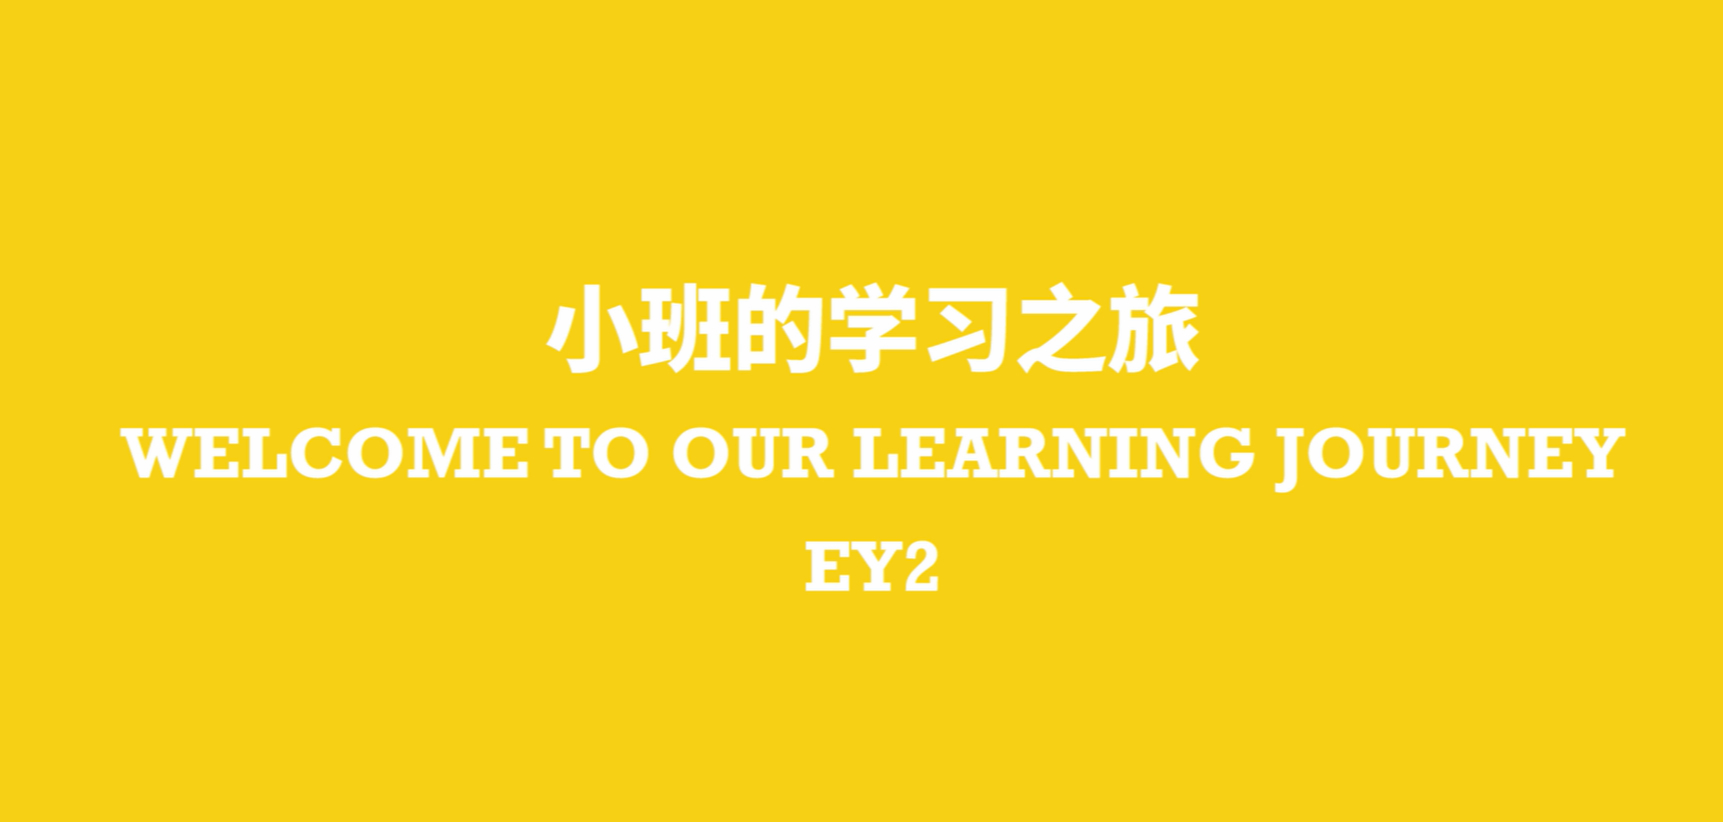 Welcome to our learning journey EY2